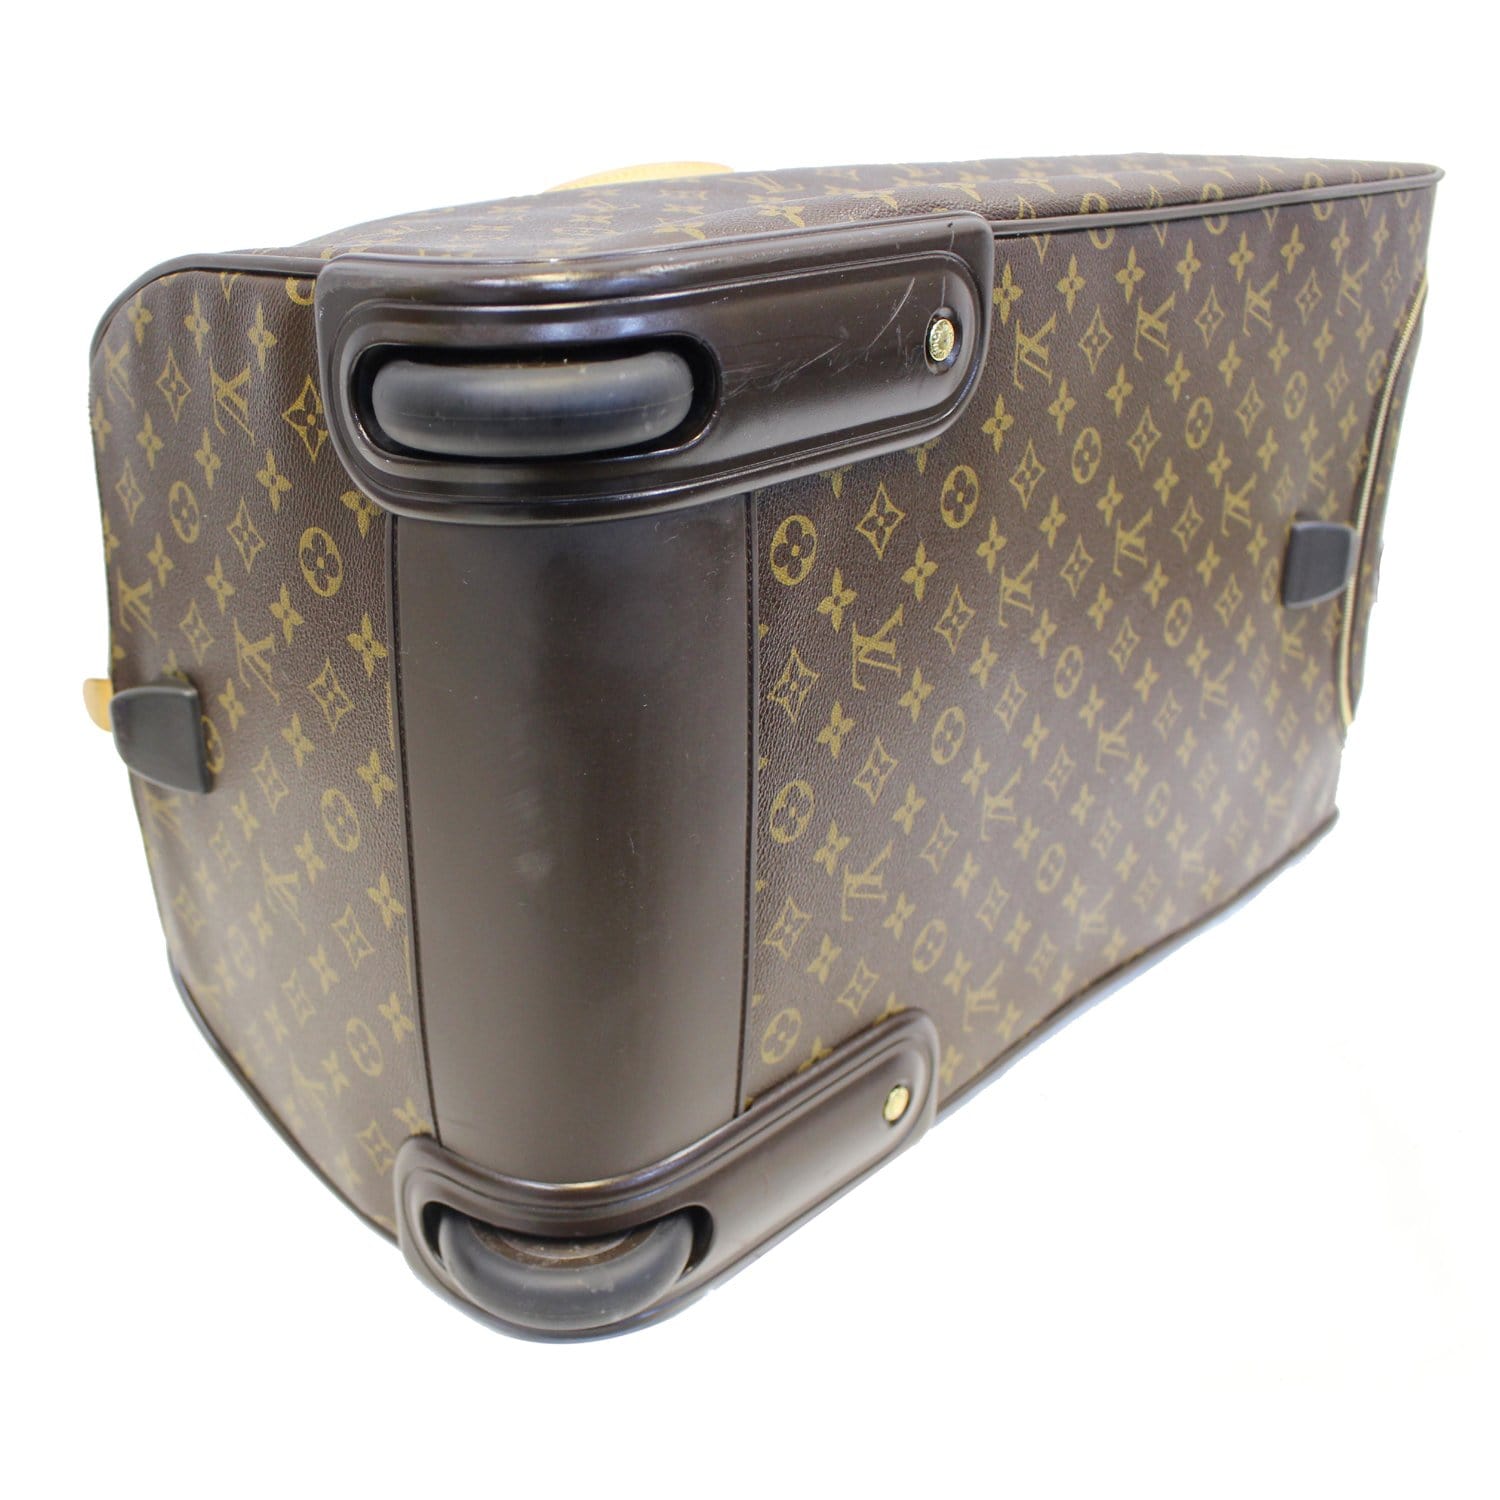 louis vuitton rolling luggage price list